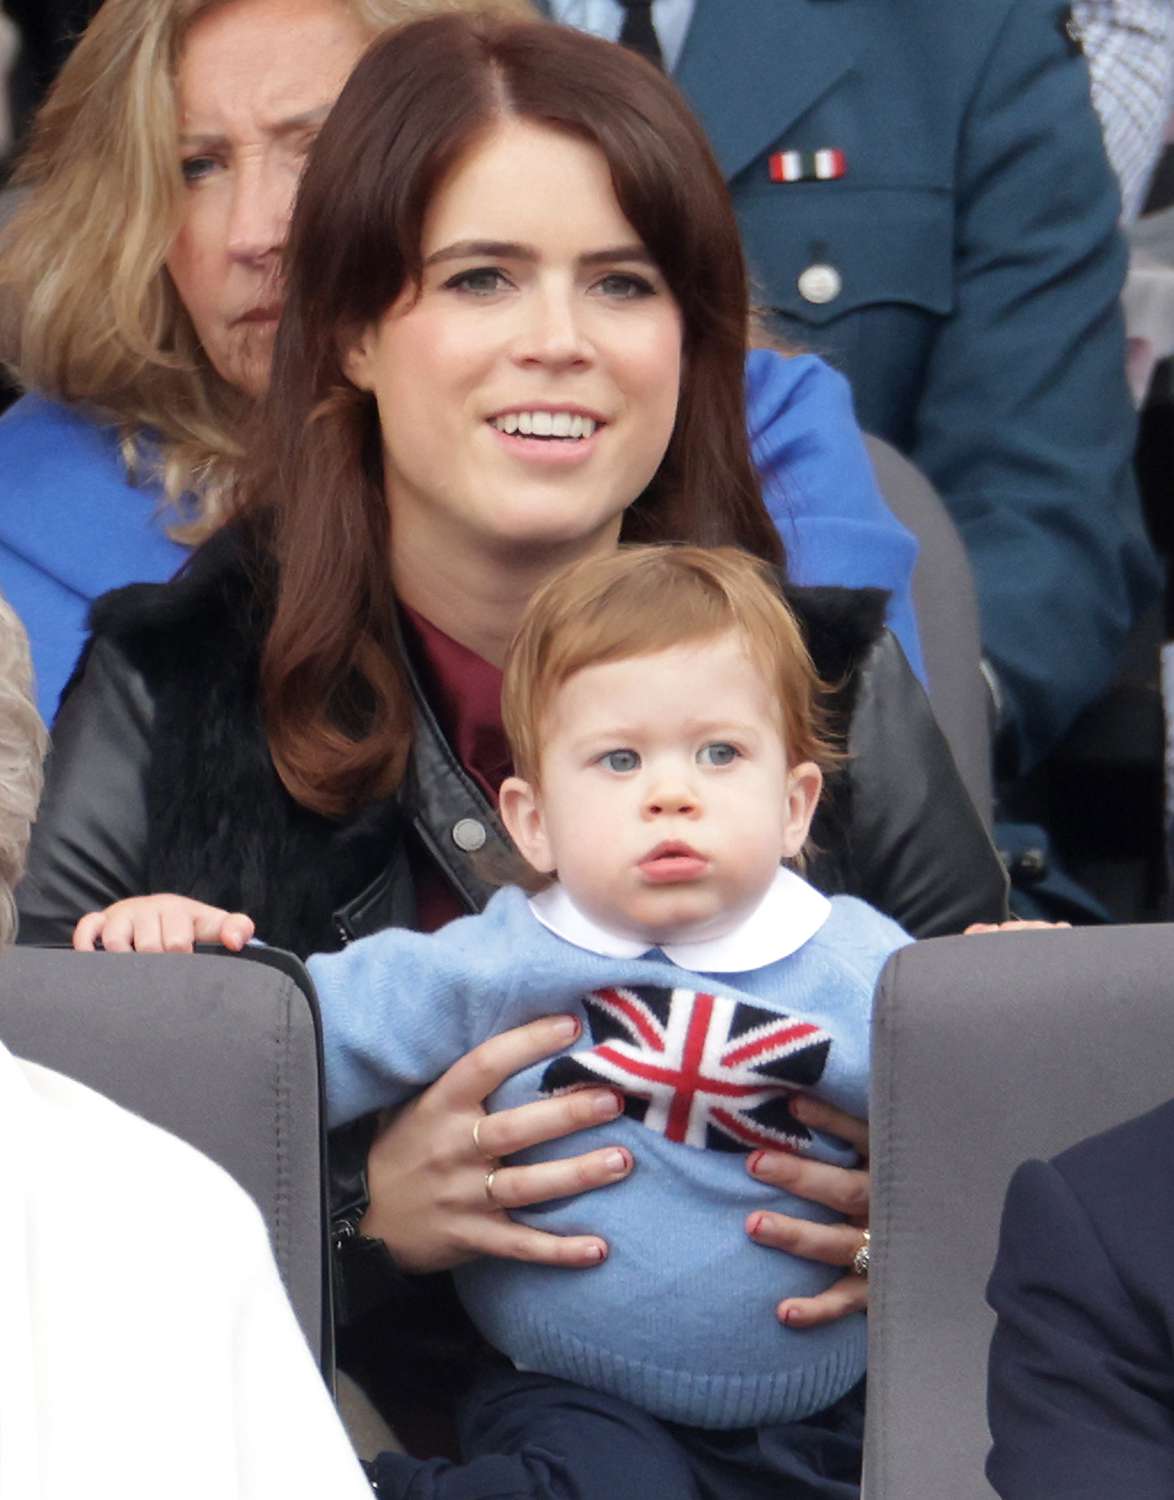 Princess Eugenie and August Brooksbank watch the Platinum Jubilee Pageant from the Royal Box during the Platinum Jubilee Pageant on June 05, 2022 in London, England. The Platinum Jubilee of Elizabeth II is being celebrated from June 2 to June 5, 2022, in the UK and Commonwealth to mark the 70th anniversary of the accession of Queen Elizabeth II on 6 February 1952.